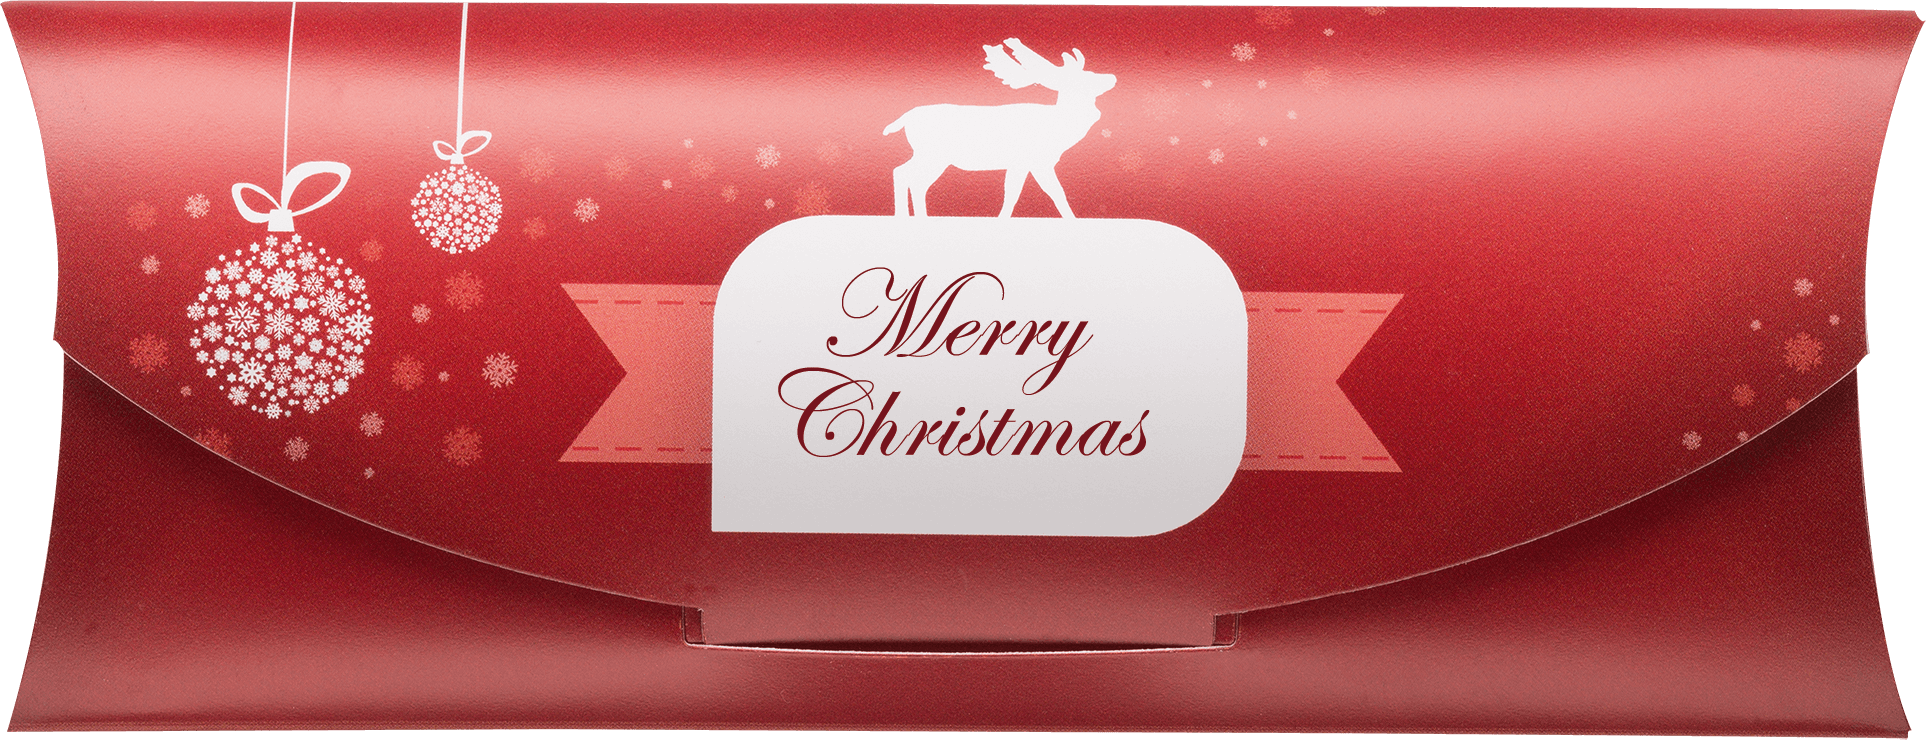 STABILO_GIFT_BOX_Christmas_Front_WithText_OriginalSize_sRGB_300dpi